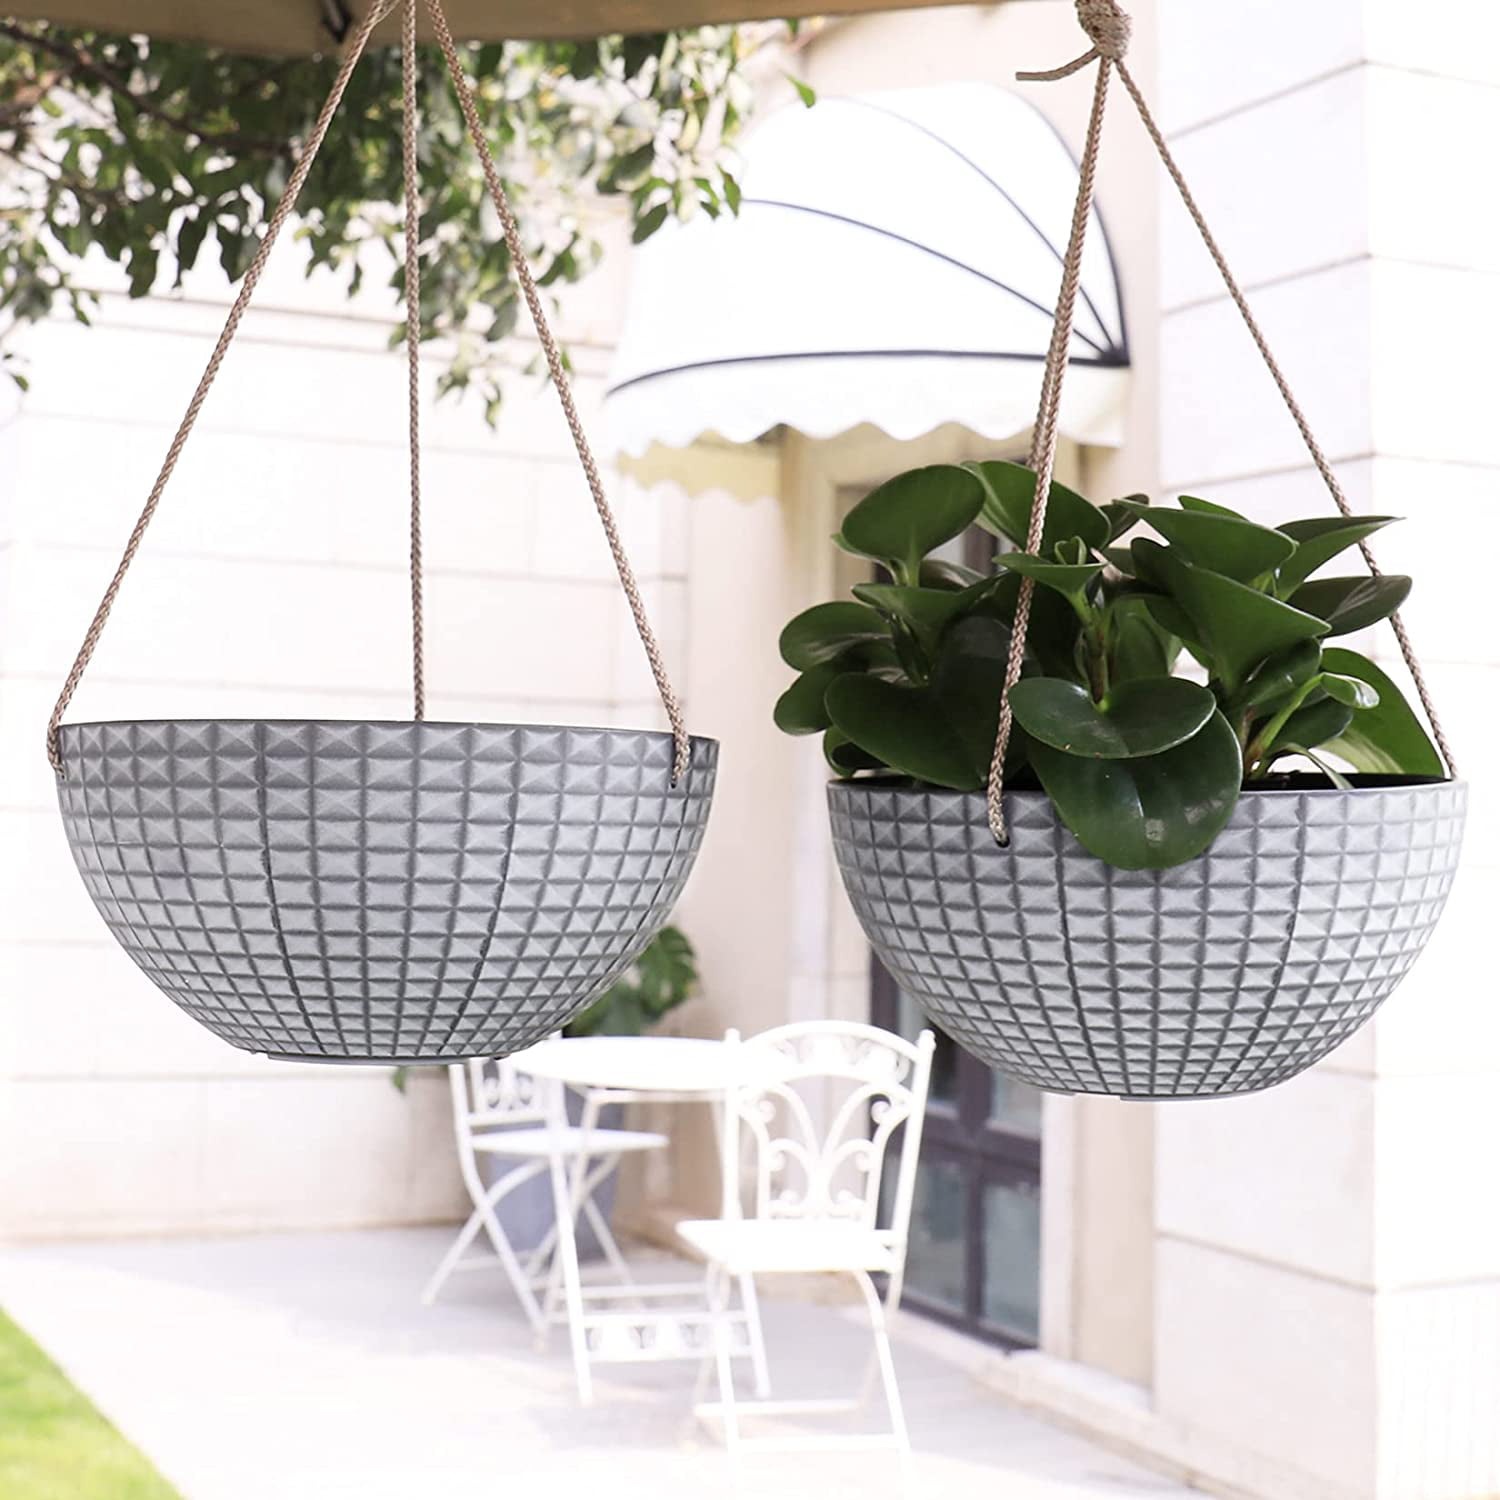 Balcony Patio Garden Matte Black Set of 2 10 Inch Plant Pots with Geometric Mosaic Texture Patterns LA JOLIE MUSE Hanging Planter Set for Outdoor Indoor with Drain Hole 